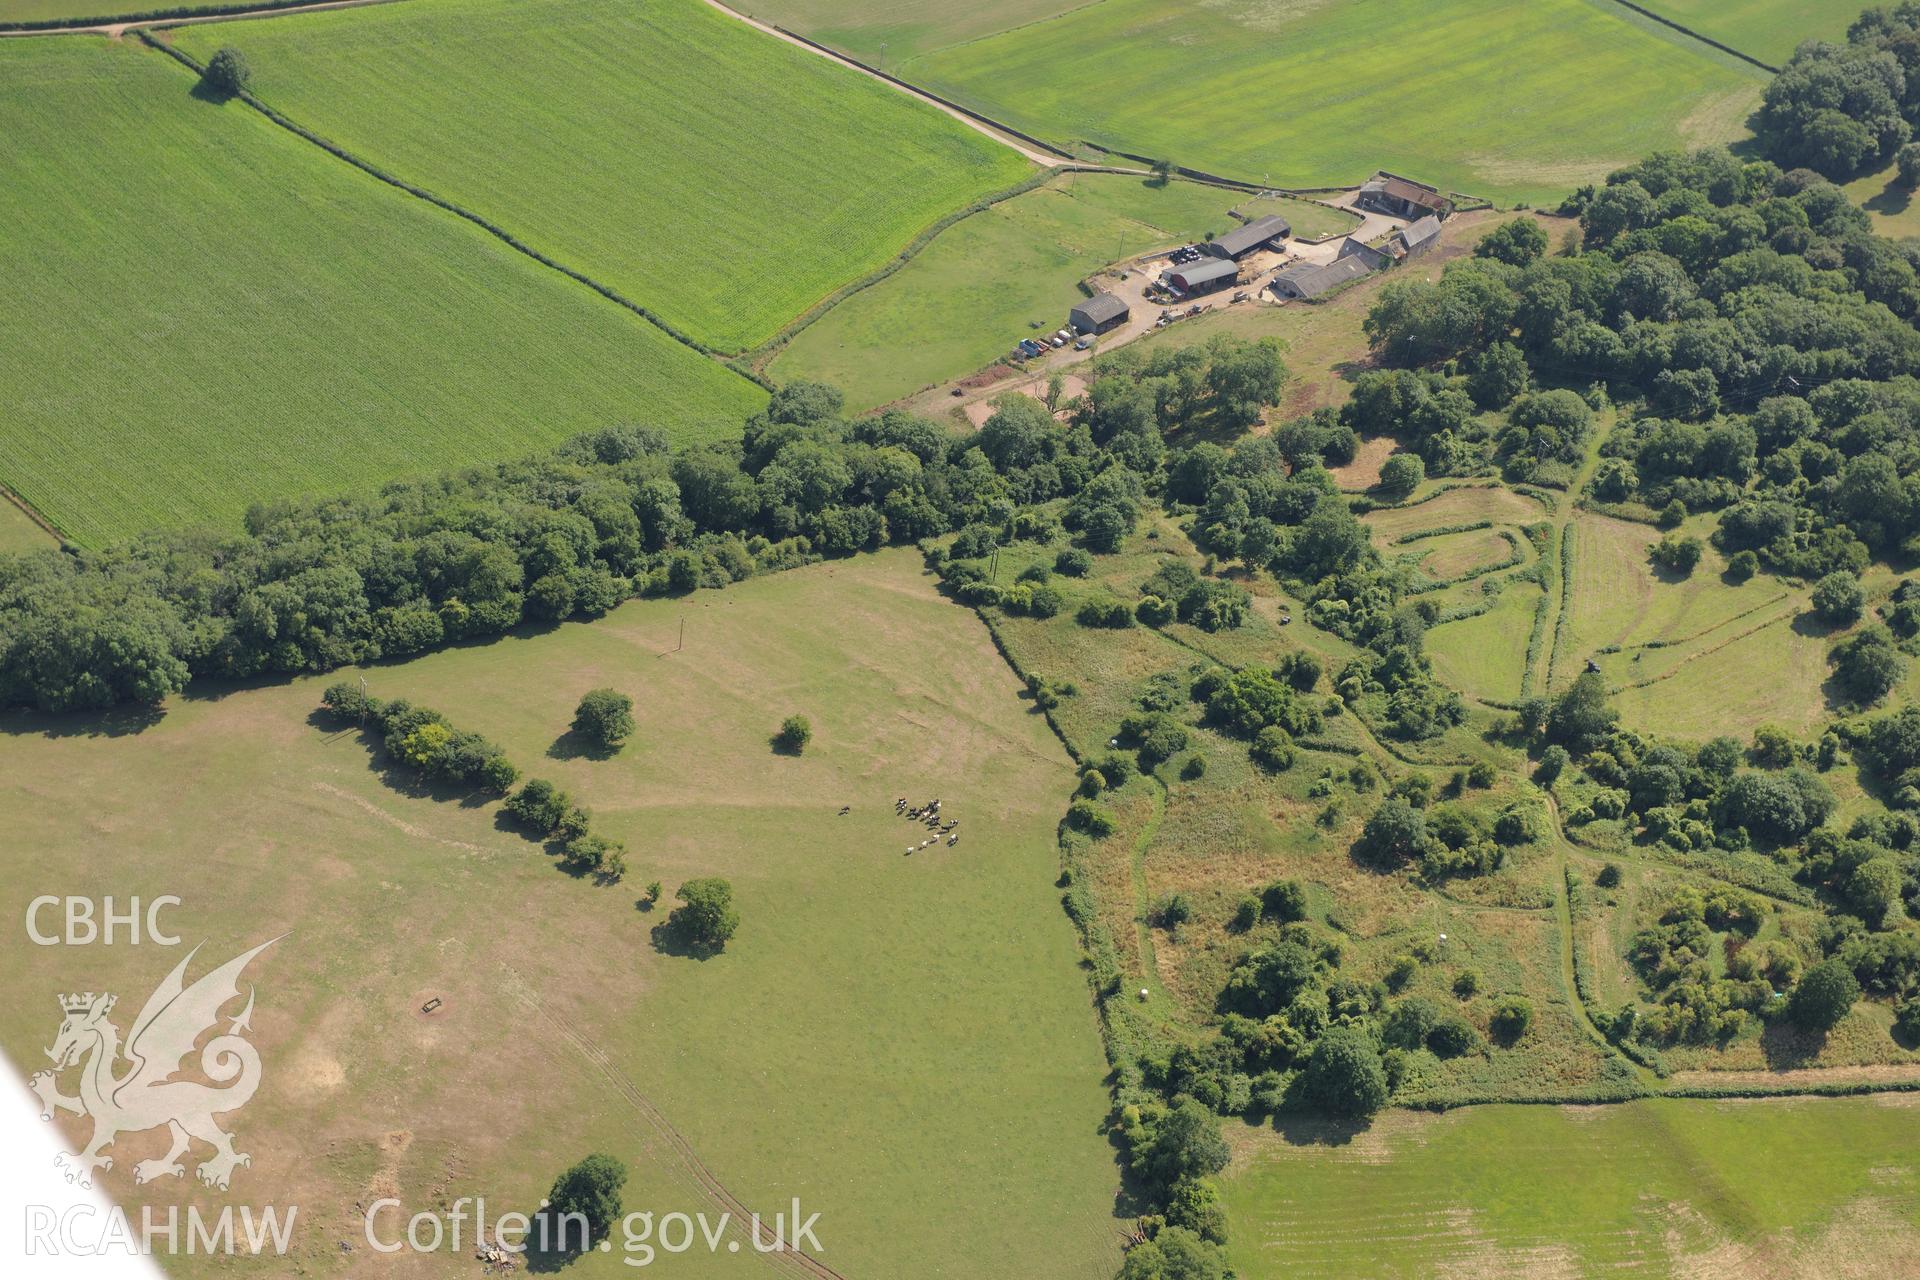 Runston medieval village and Runston farm (including late 18th or early 19th century barn), Mathern, south west of Chepstow. Oblique aerial photograph taken during the Royal Commission?s programme of archaeological aerial reconnaissance by Toby Driver on